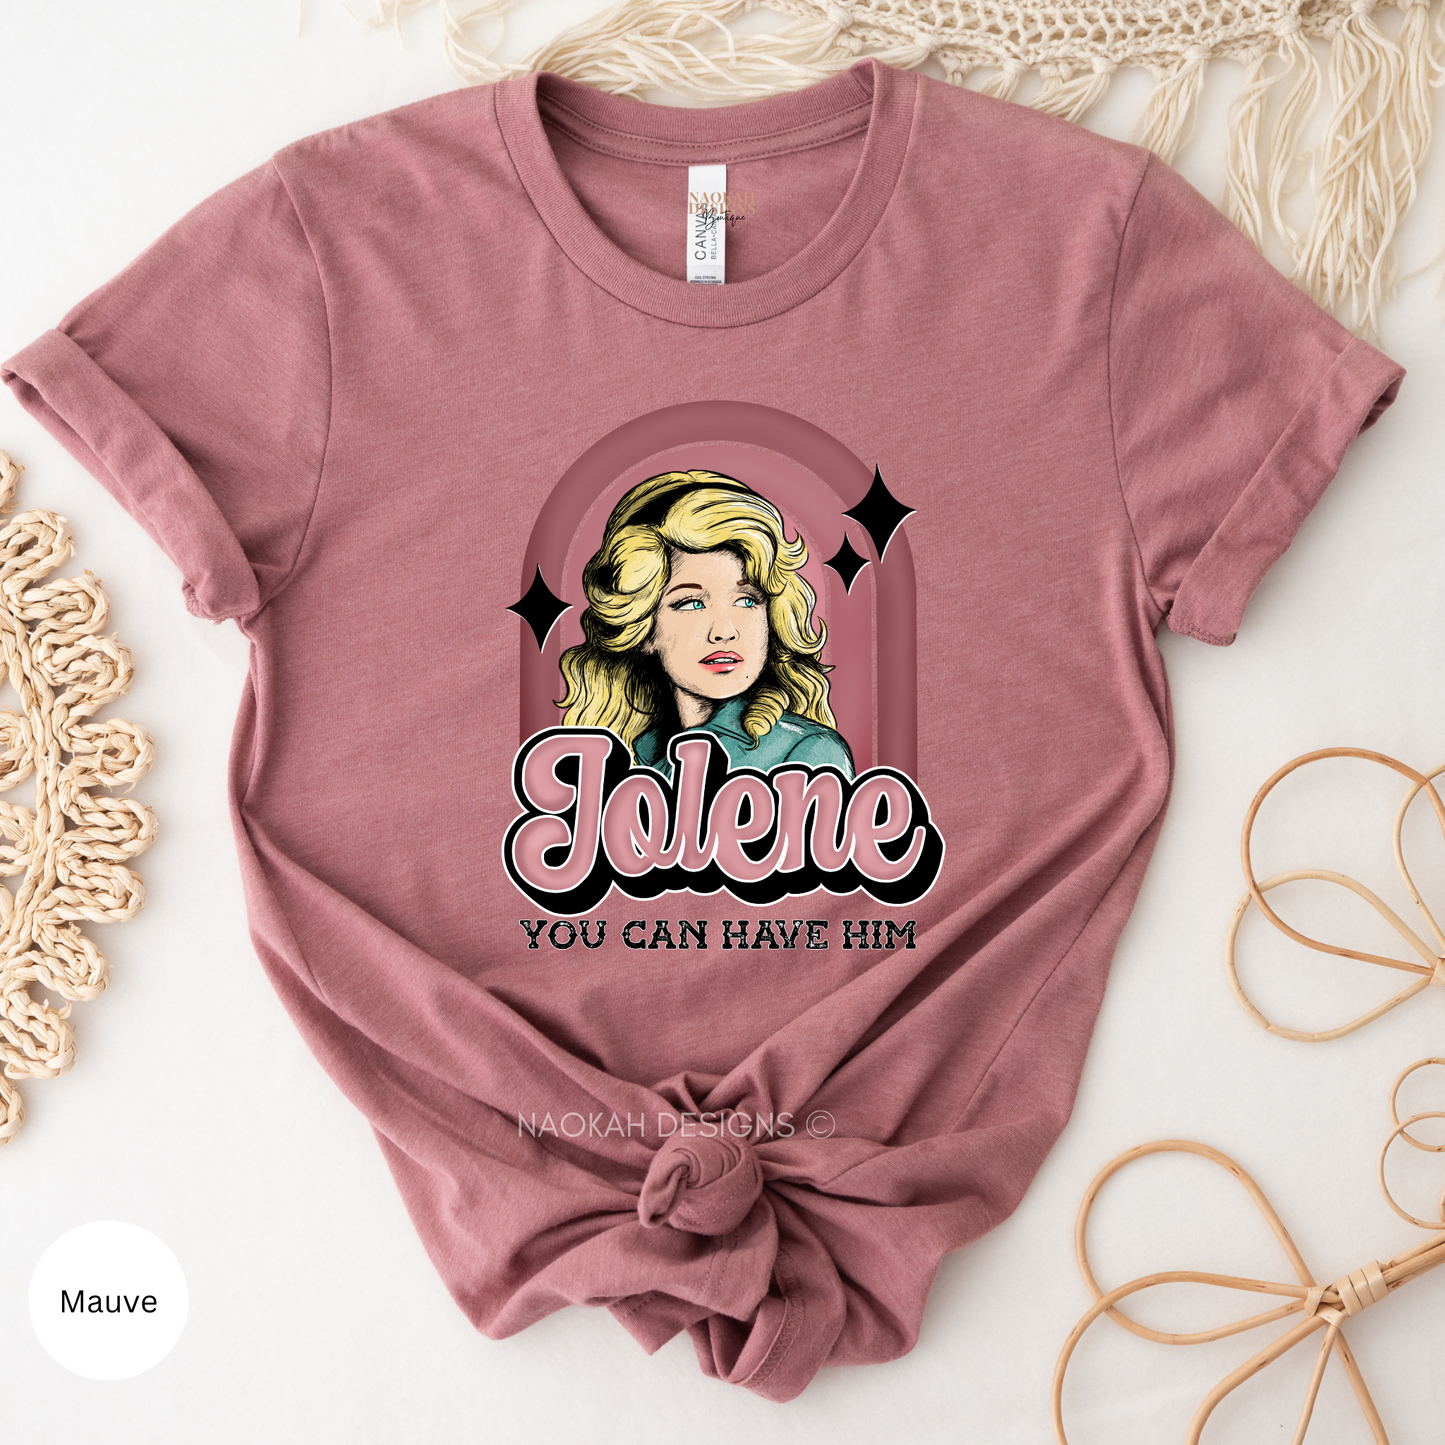 jolene you can have him t-shirt, cowgirl shirt, dolly parton tee, cowgirl graphic tee, western t-shirt, western graphic tee, jolene t-shirt